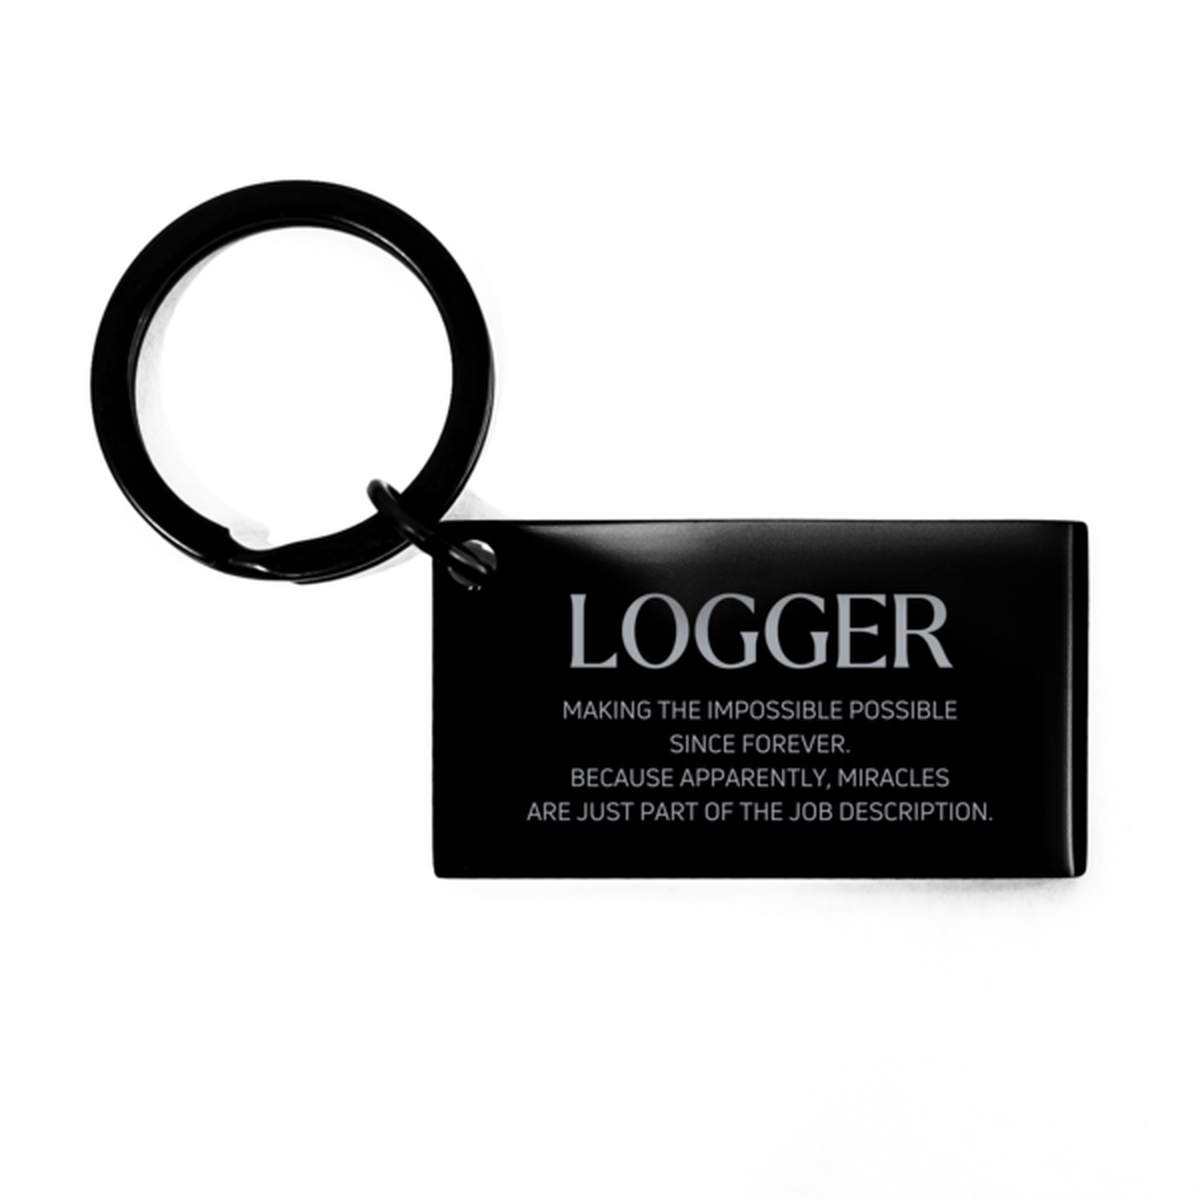 Funny Logger Gifts, Miracles are just part of the job description, Inspirational Birthday Keychain For Logger, Men, Women, Coworkers, Friends, Boss